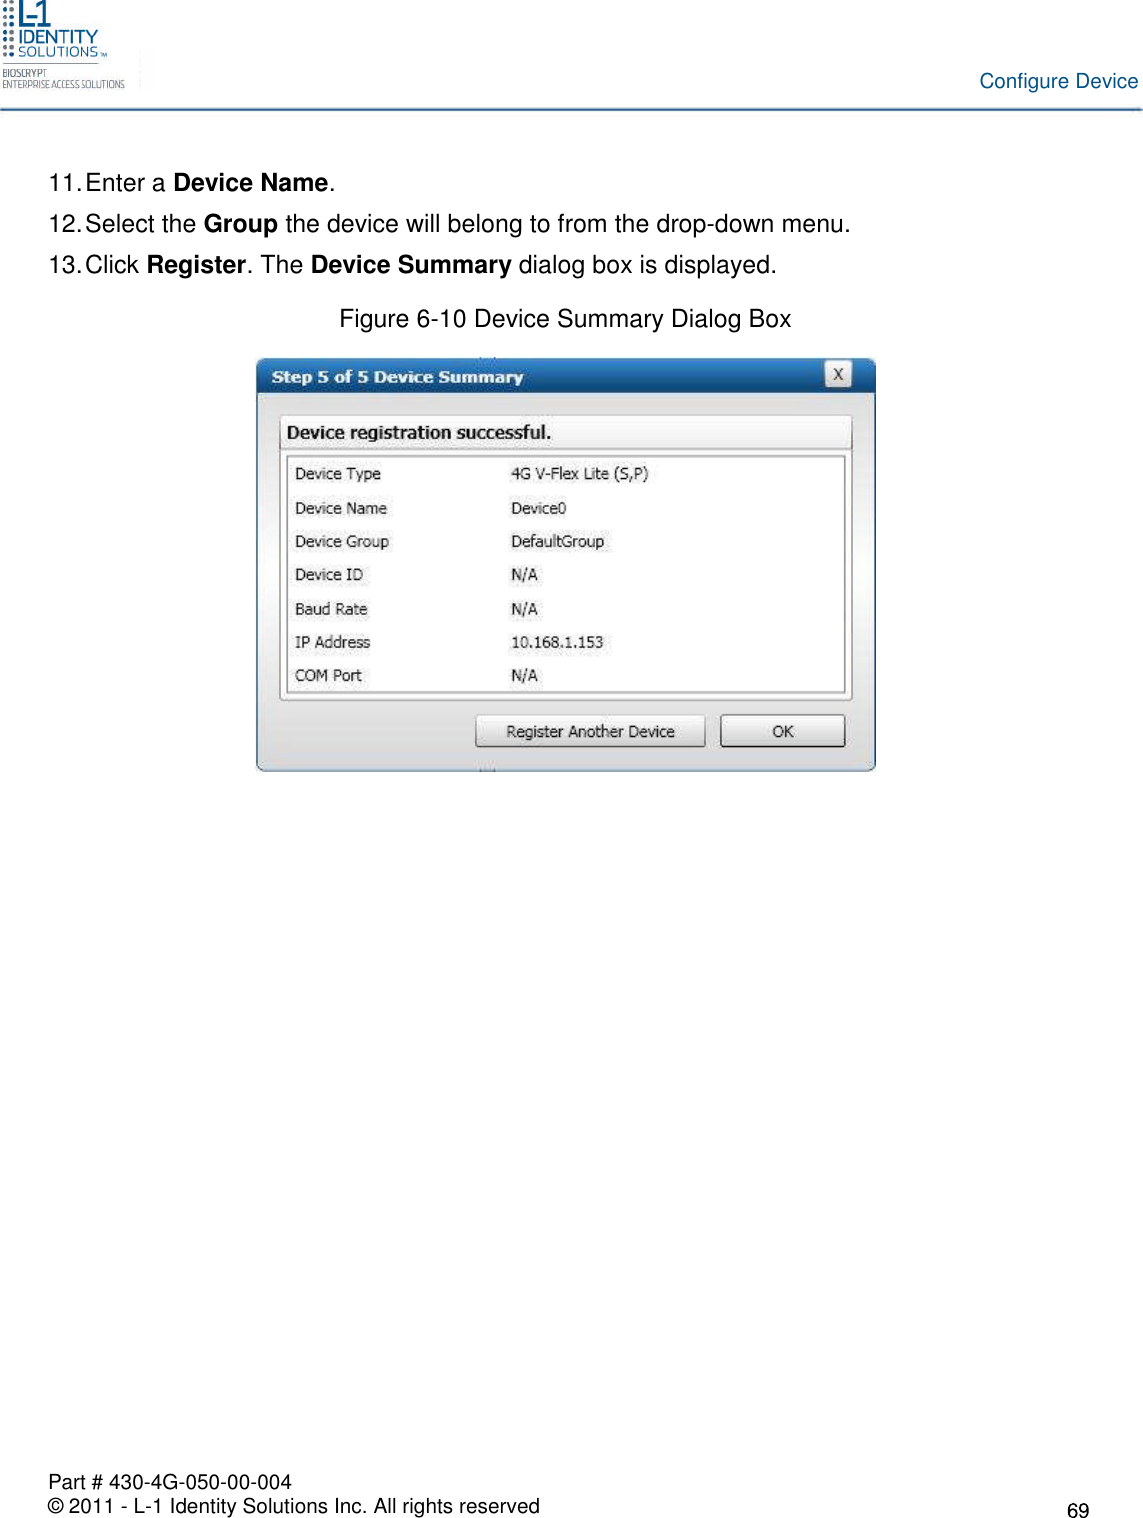 Part # 430-4G-050-00-004© 2011 - L-1 Identity Solutions Inc. All rights reservedConfigure Device11.Enter a Device Name.12.Select the Group the device will belong to from the drop-down menu.13.Click Register. The Device Summary dialog box is displayed.Figure 6-10 Device Summary Dialog Box